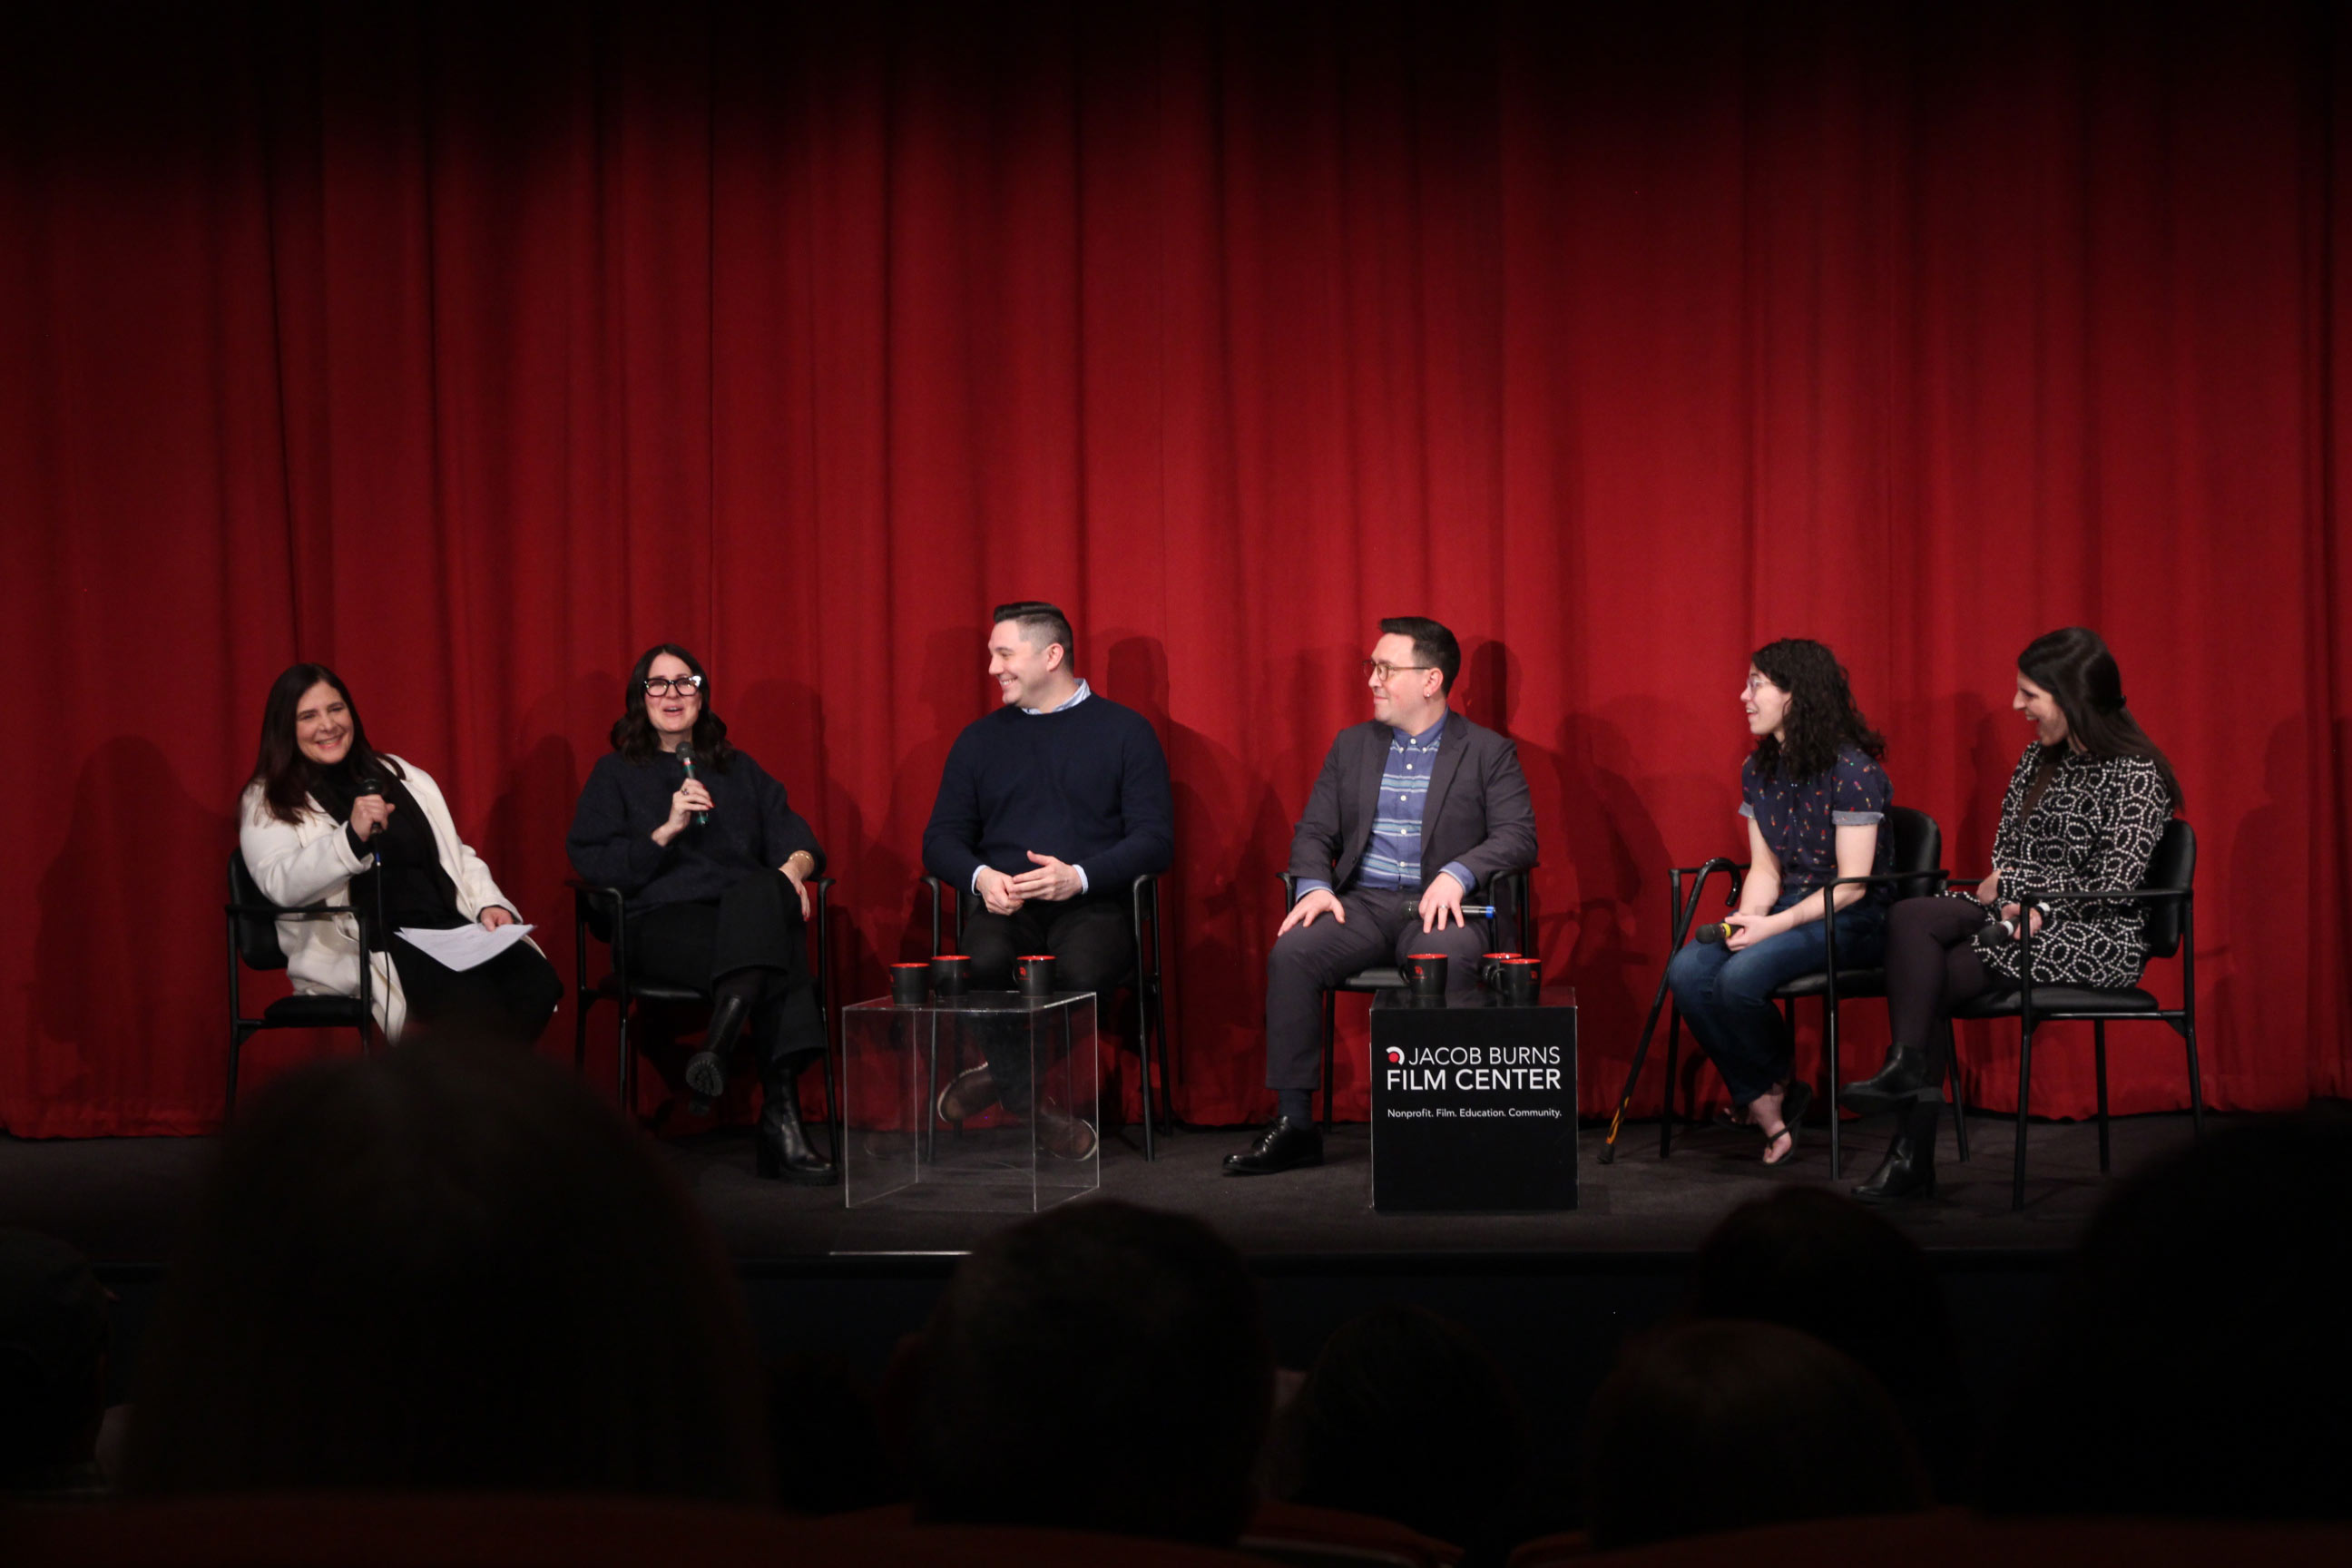 A photo of Shiva and other panelists discussing her film's adaptation at the  Jacob Burns Film Center (JBFC) in Pleasantville, NY.